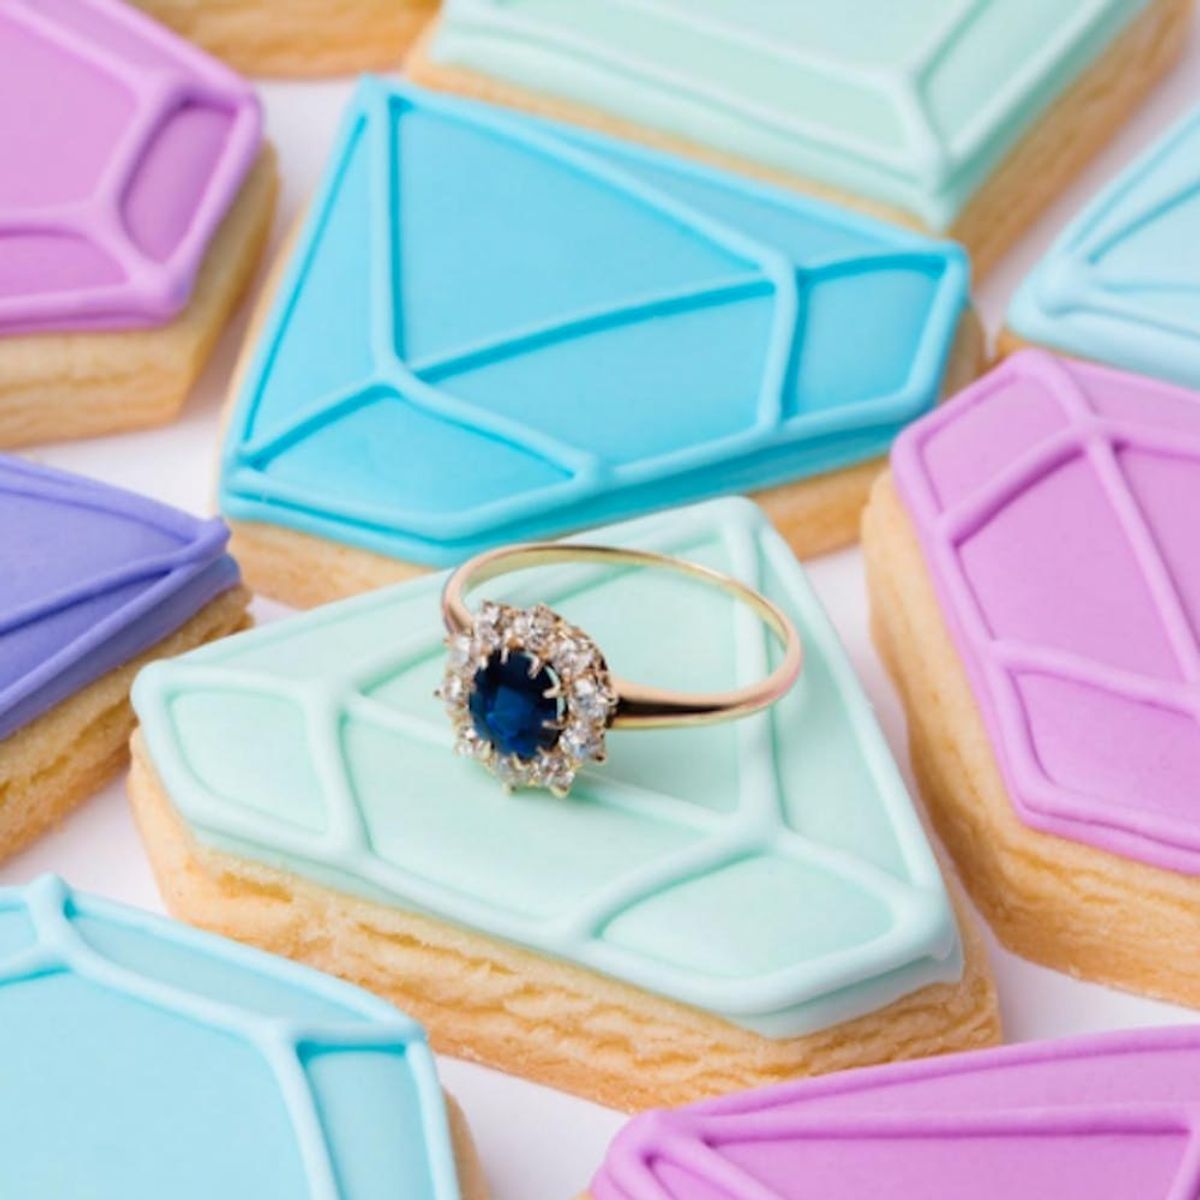 Engagement Ring Instagram Accounts Are the Perfect Way to Kill Time on Your Phone Over Christmas